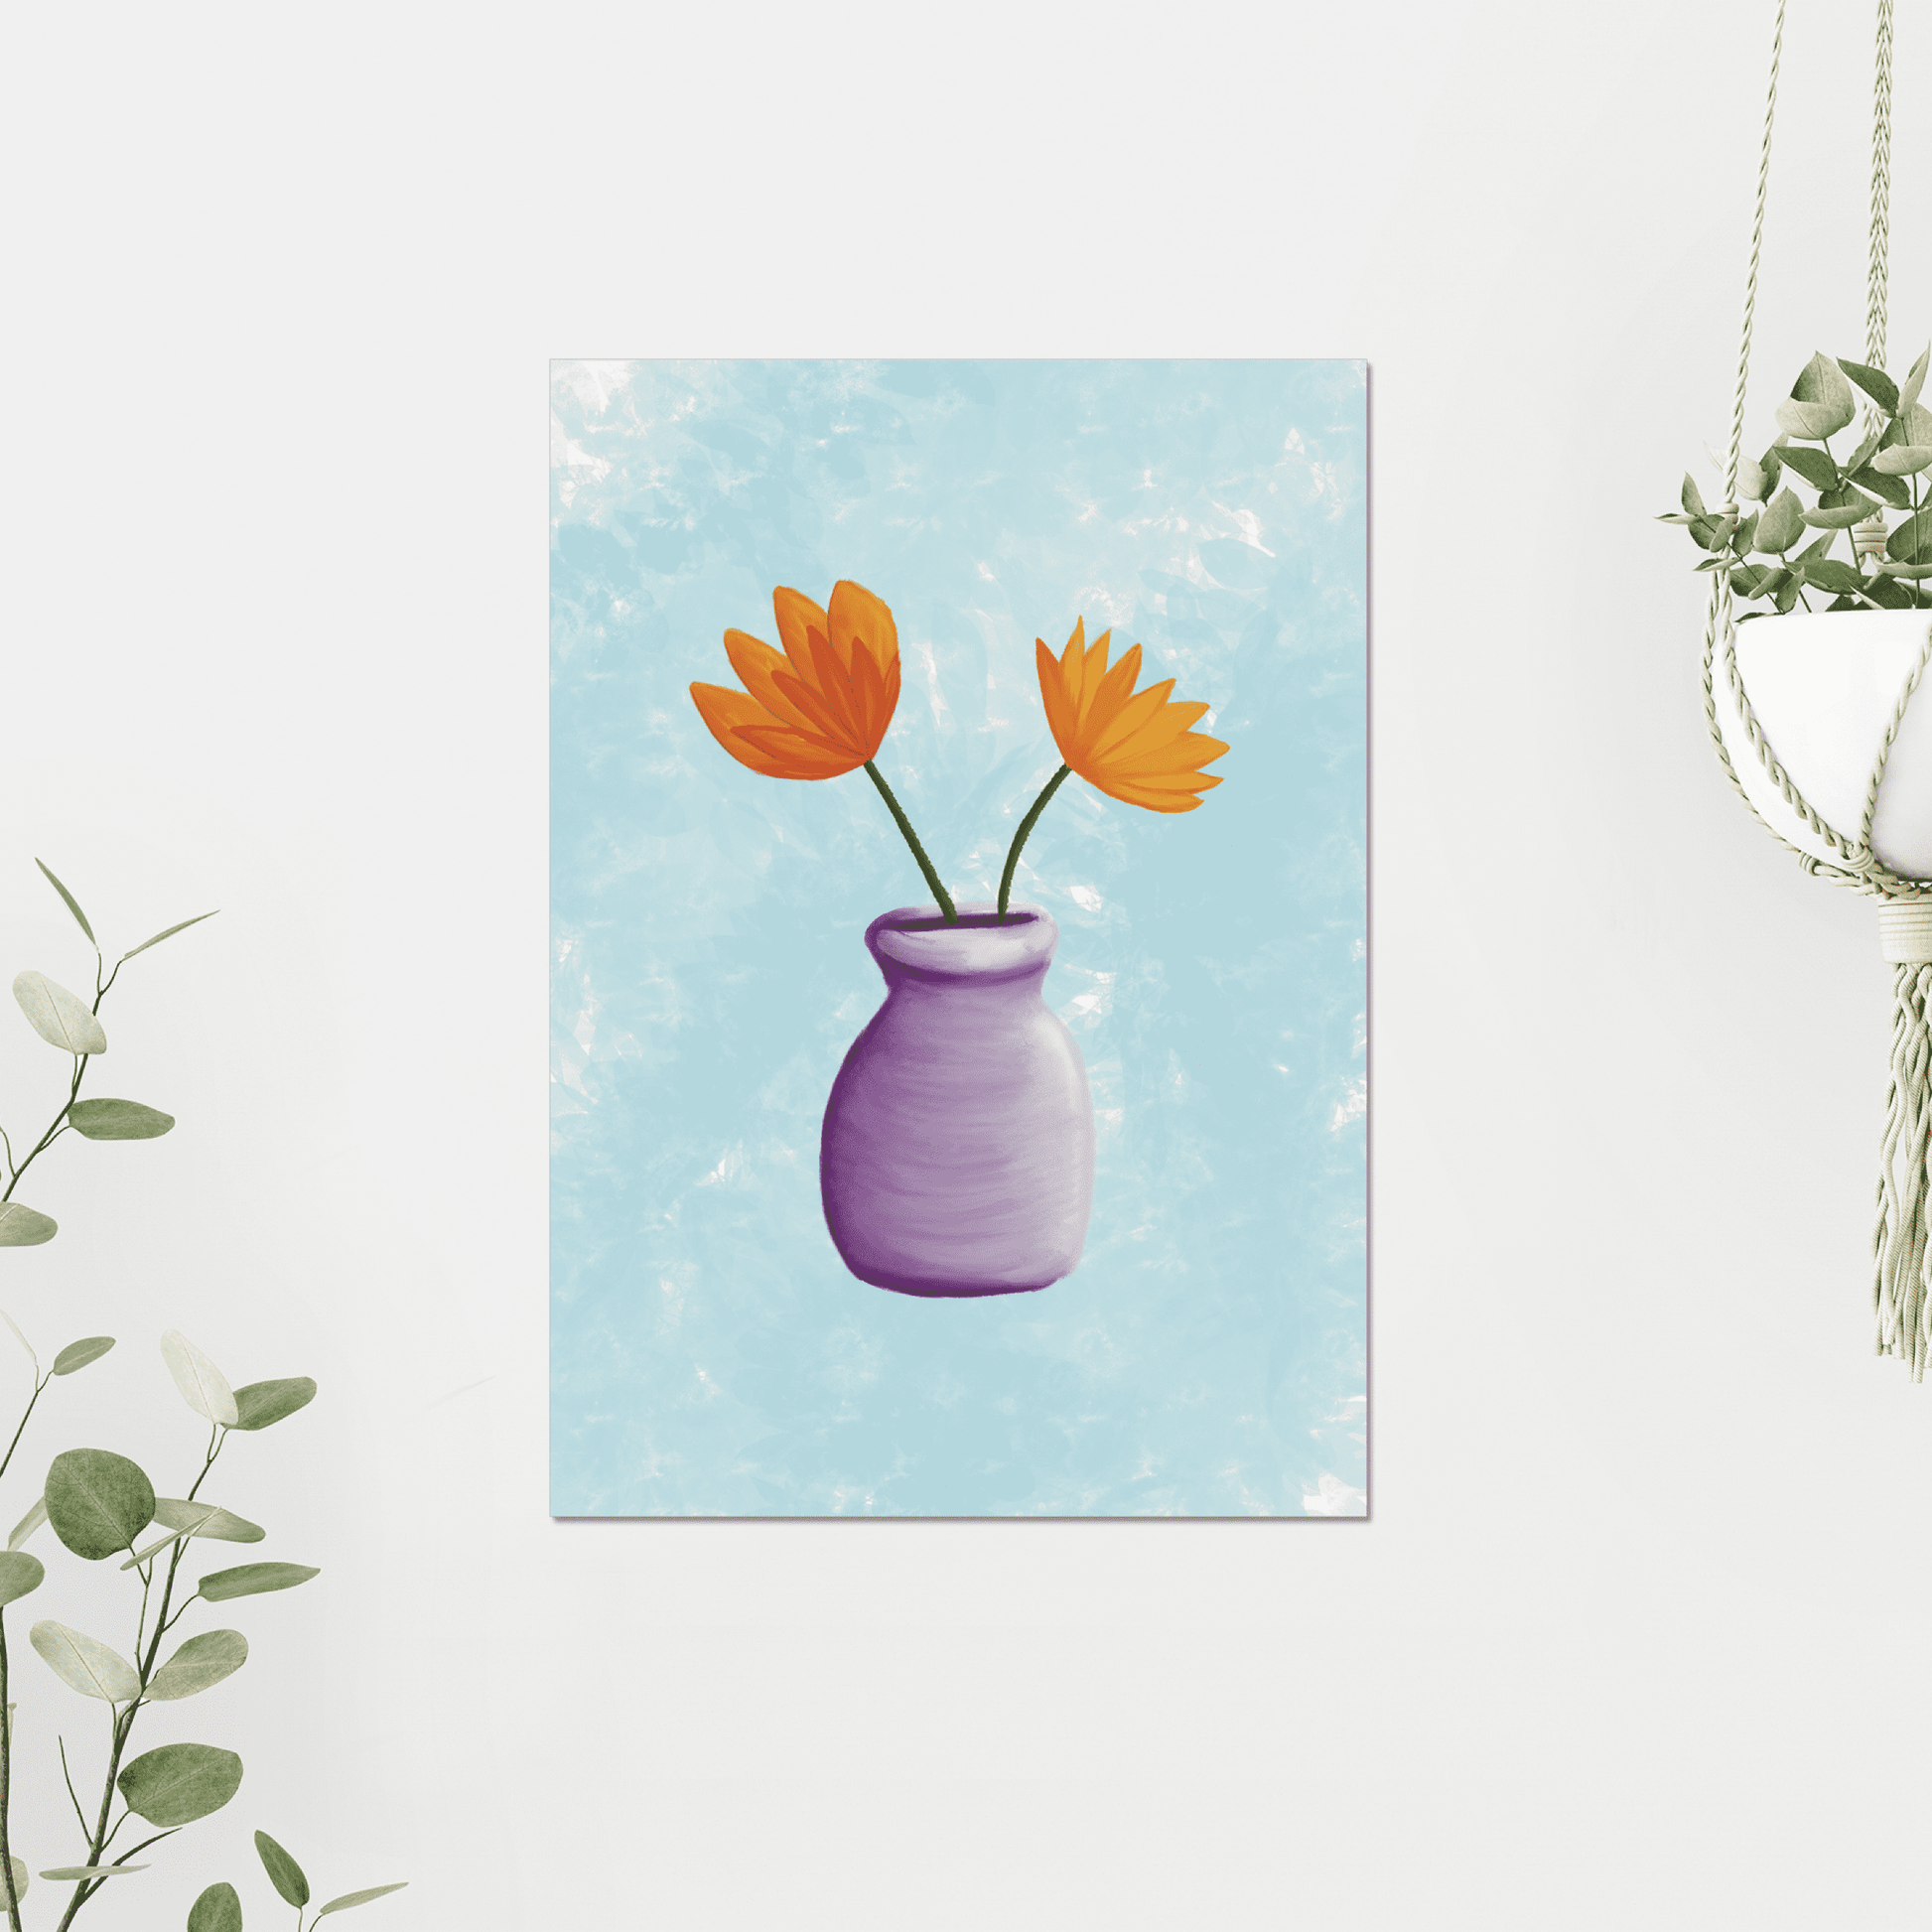 We love the eclectic boho vibes in this flower and vase print. Like a painting your gran used to have hanging up her downstairs loo!  And nothing wrong with that. Keep it colourful and quirky, we say. 